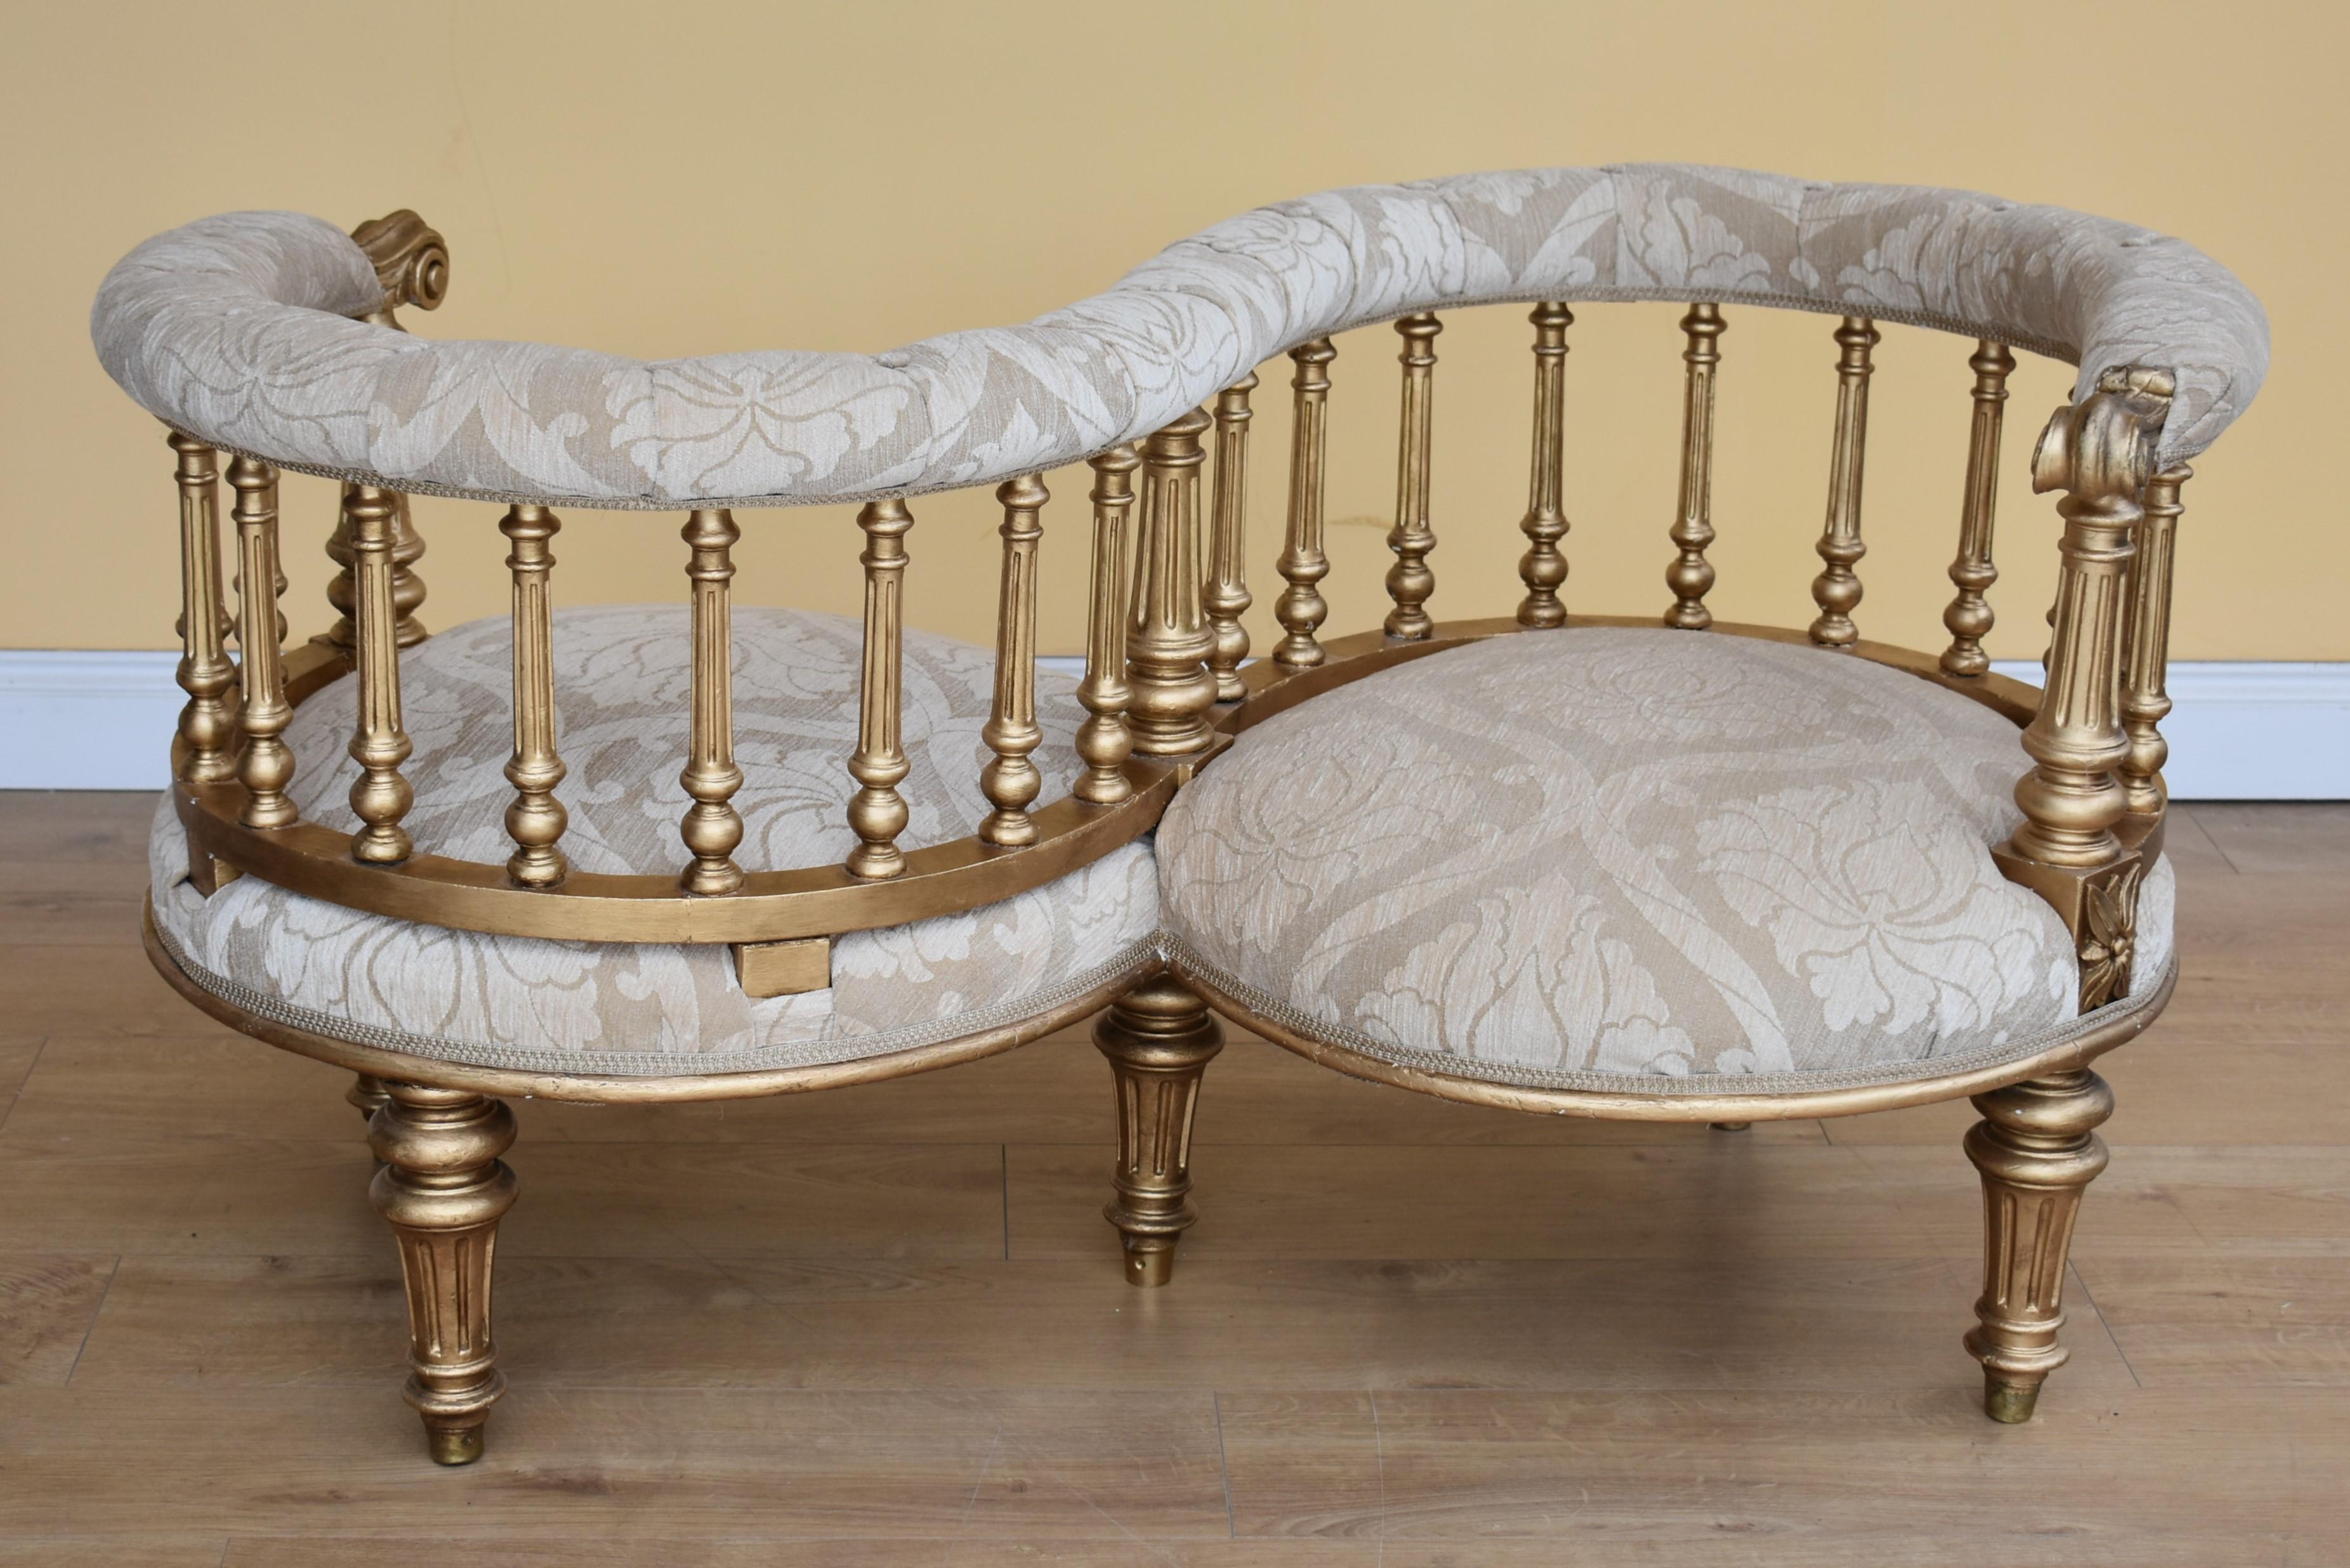 Victorian giltwood conversation seat in excellent condition having been recently upholstered and recovered in a floral fabric. The seat has nicely scrolled arms standing on turned legs.

Dimensions: Width 51